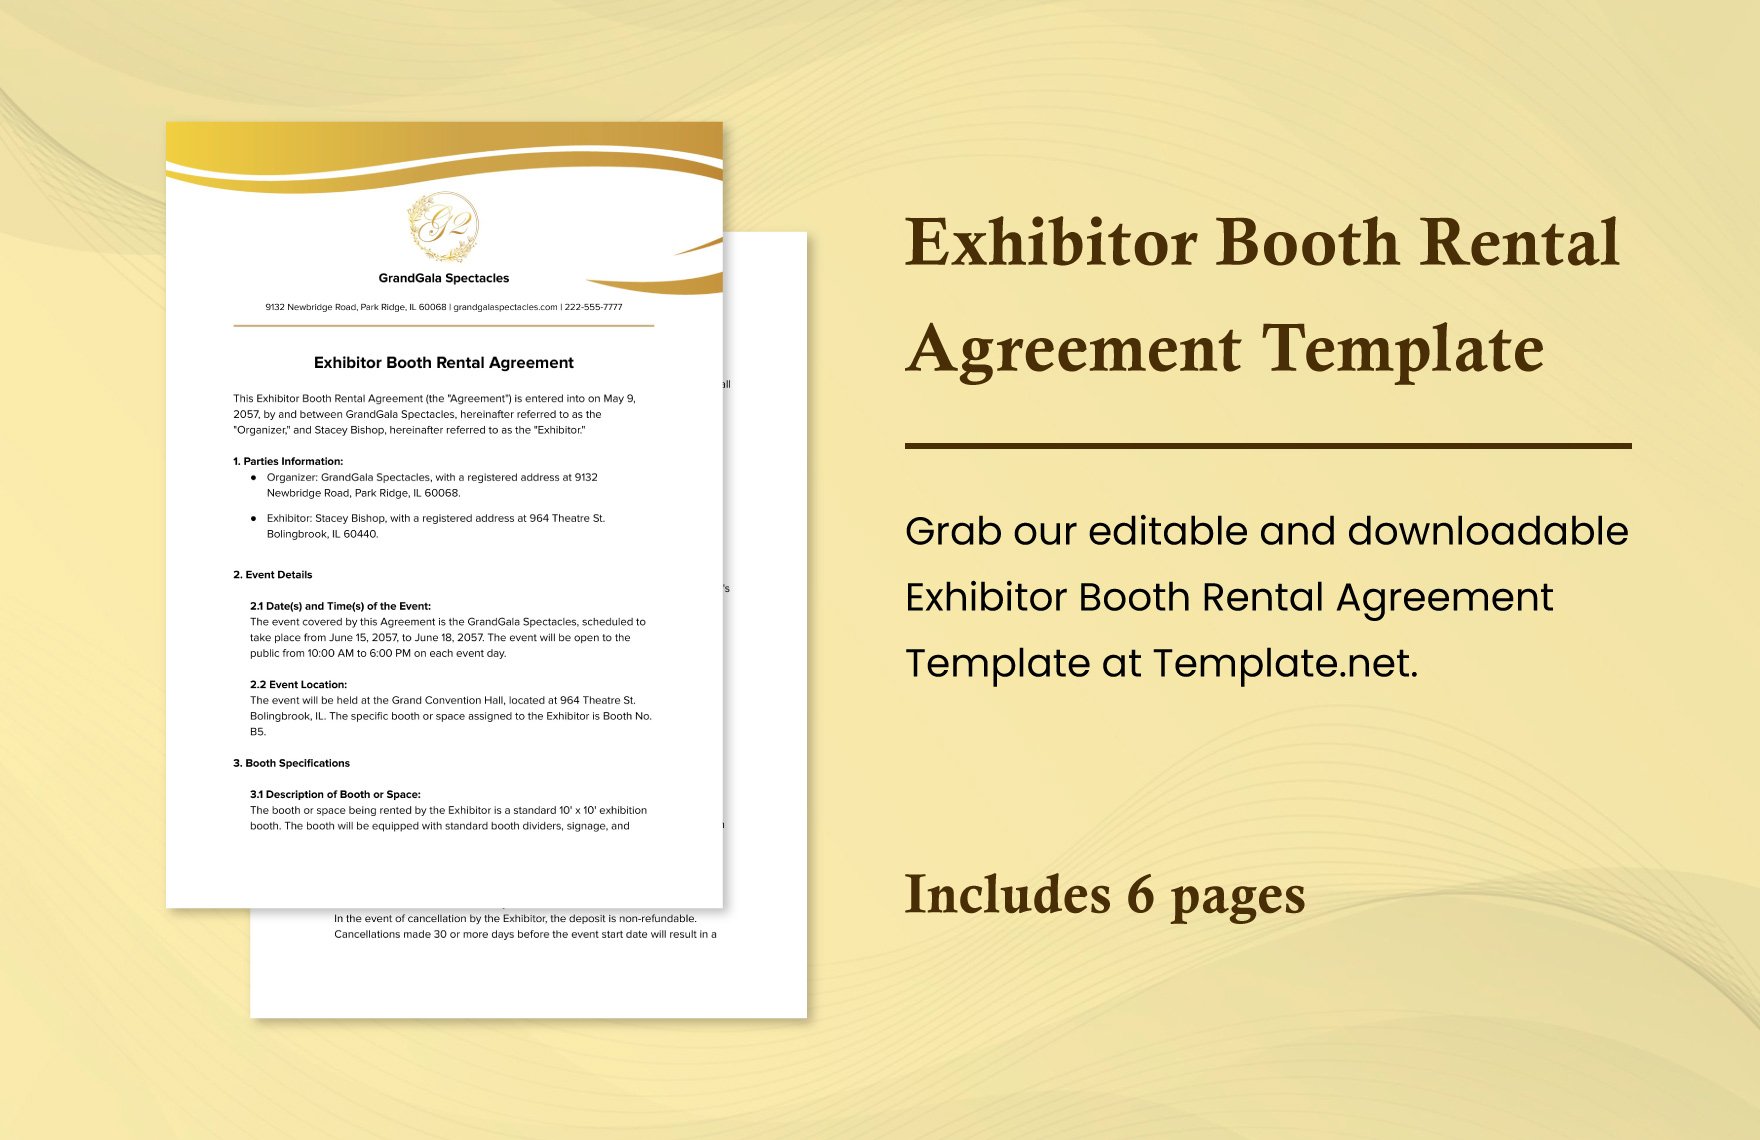 Exhibitor Booth Rental Agreement Template